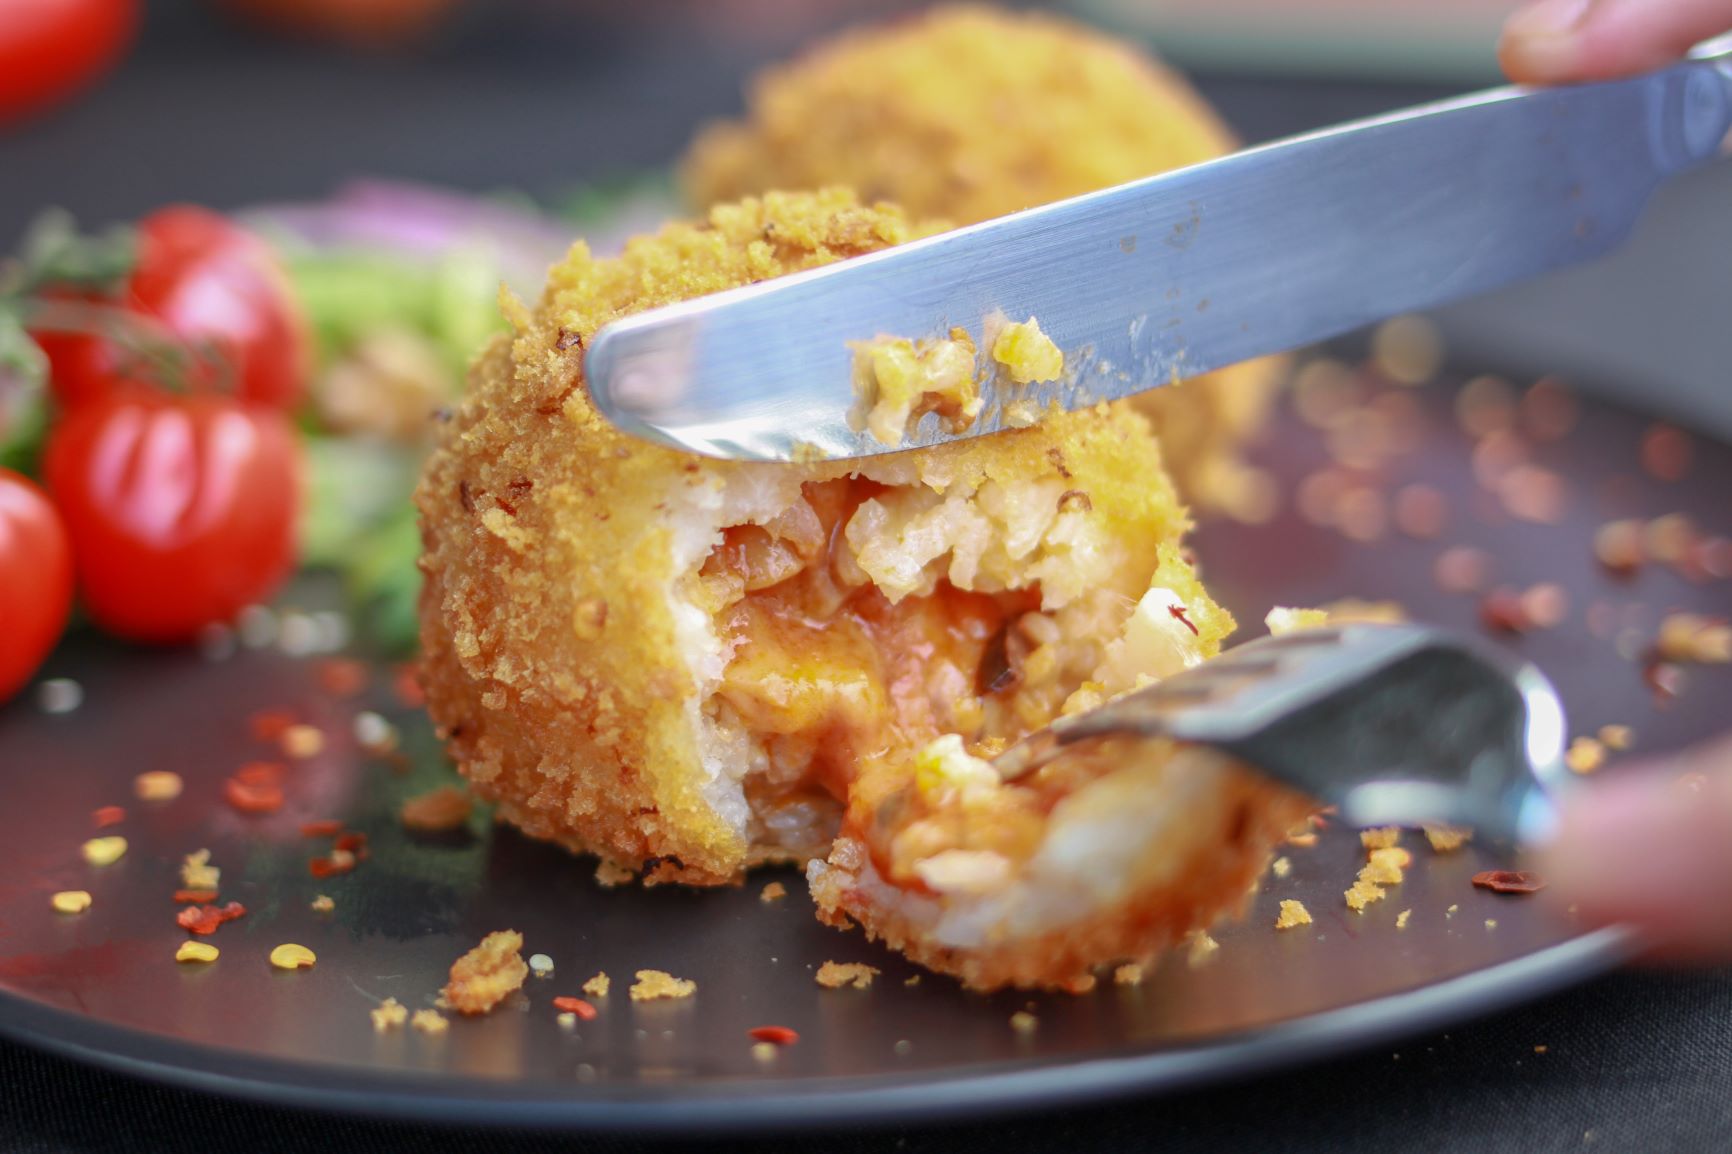 a person cutting into arancini with a knife and fork